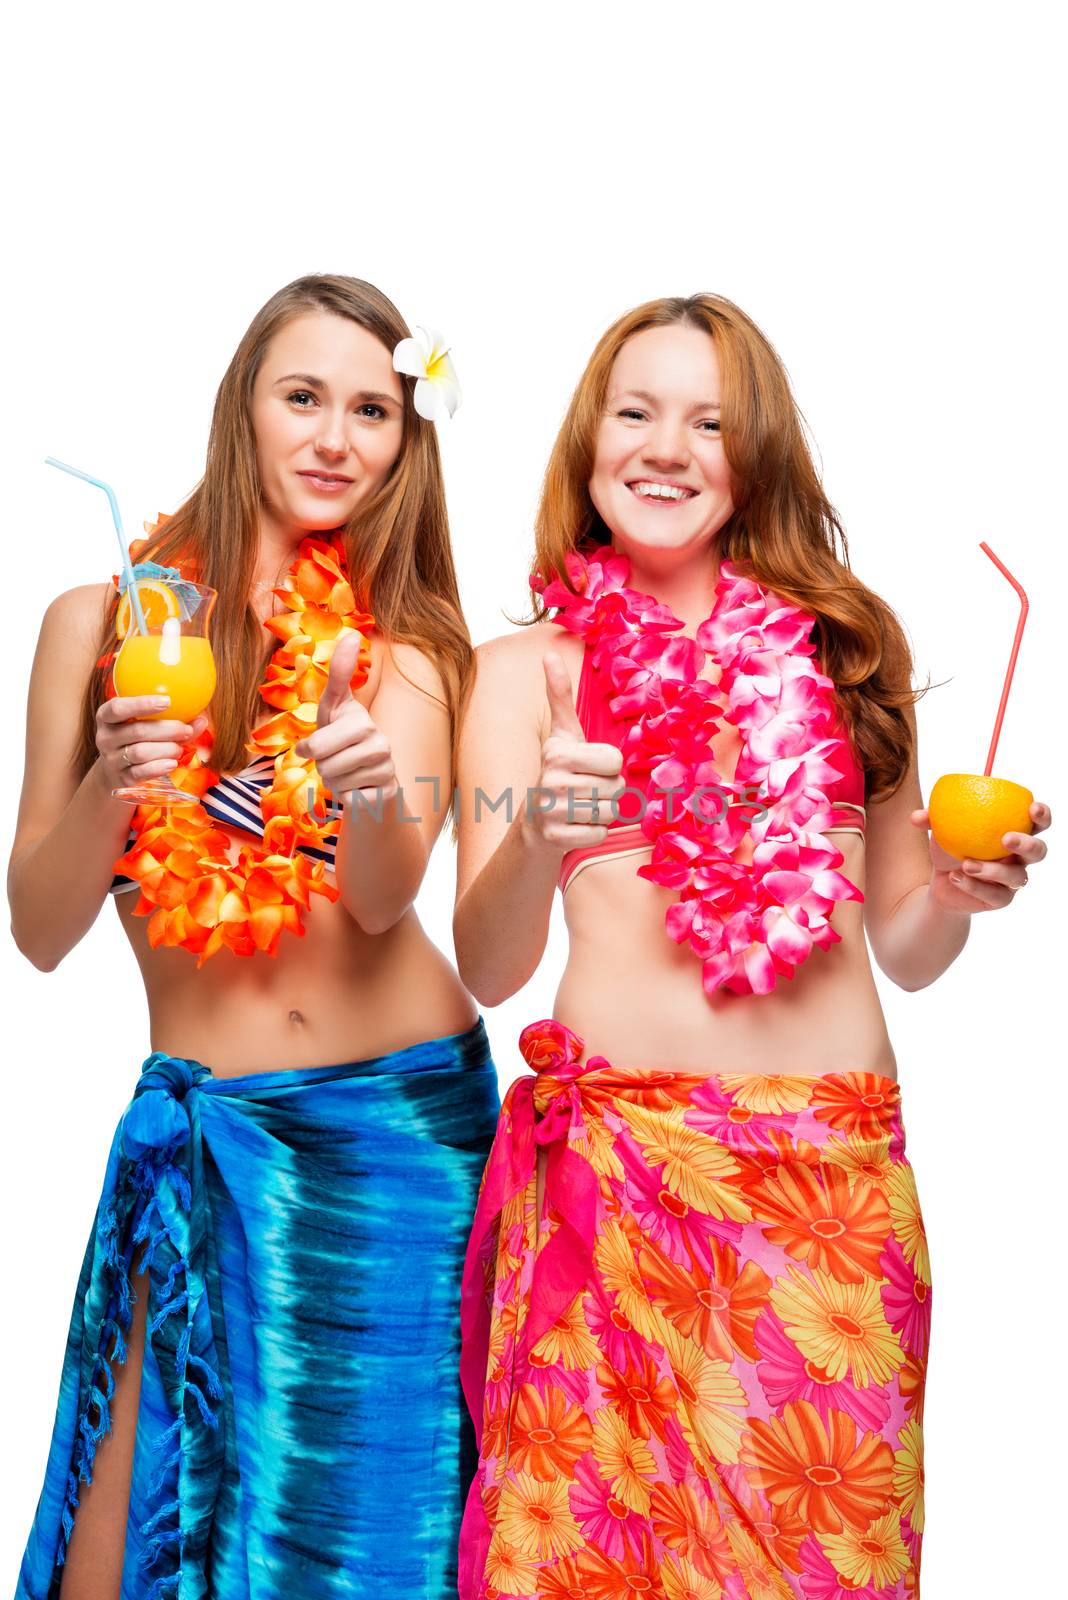 Girlfriends in Hawaiian lei with cocktails posing on white backg by kosmsos111